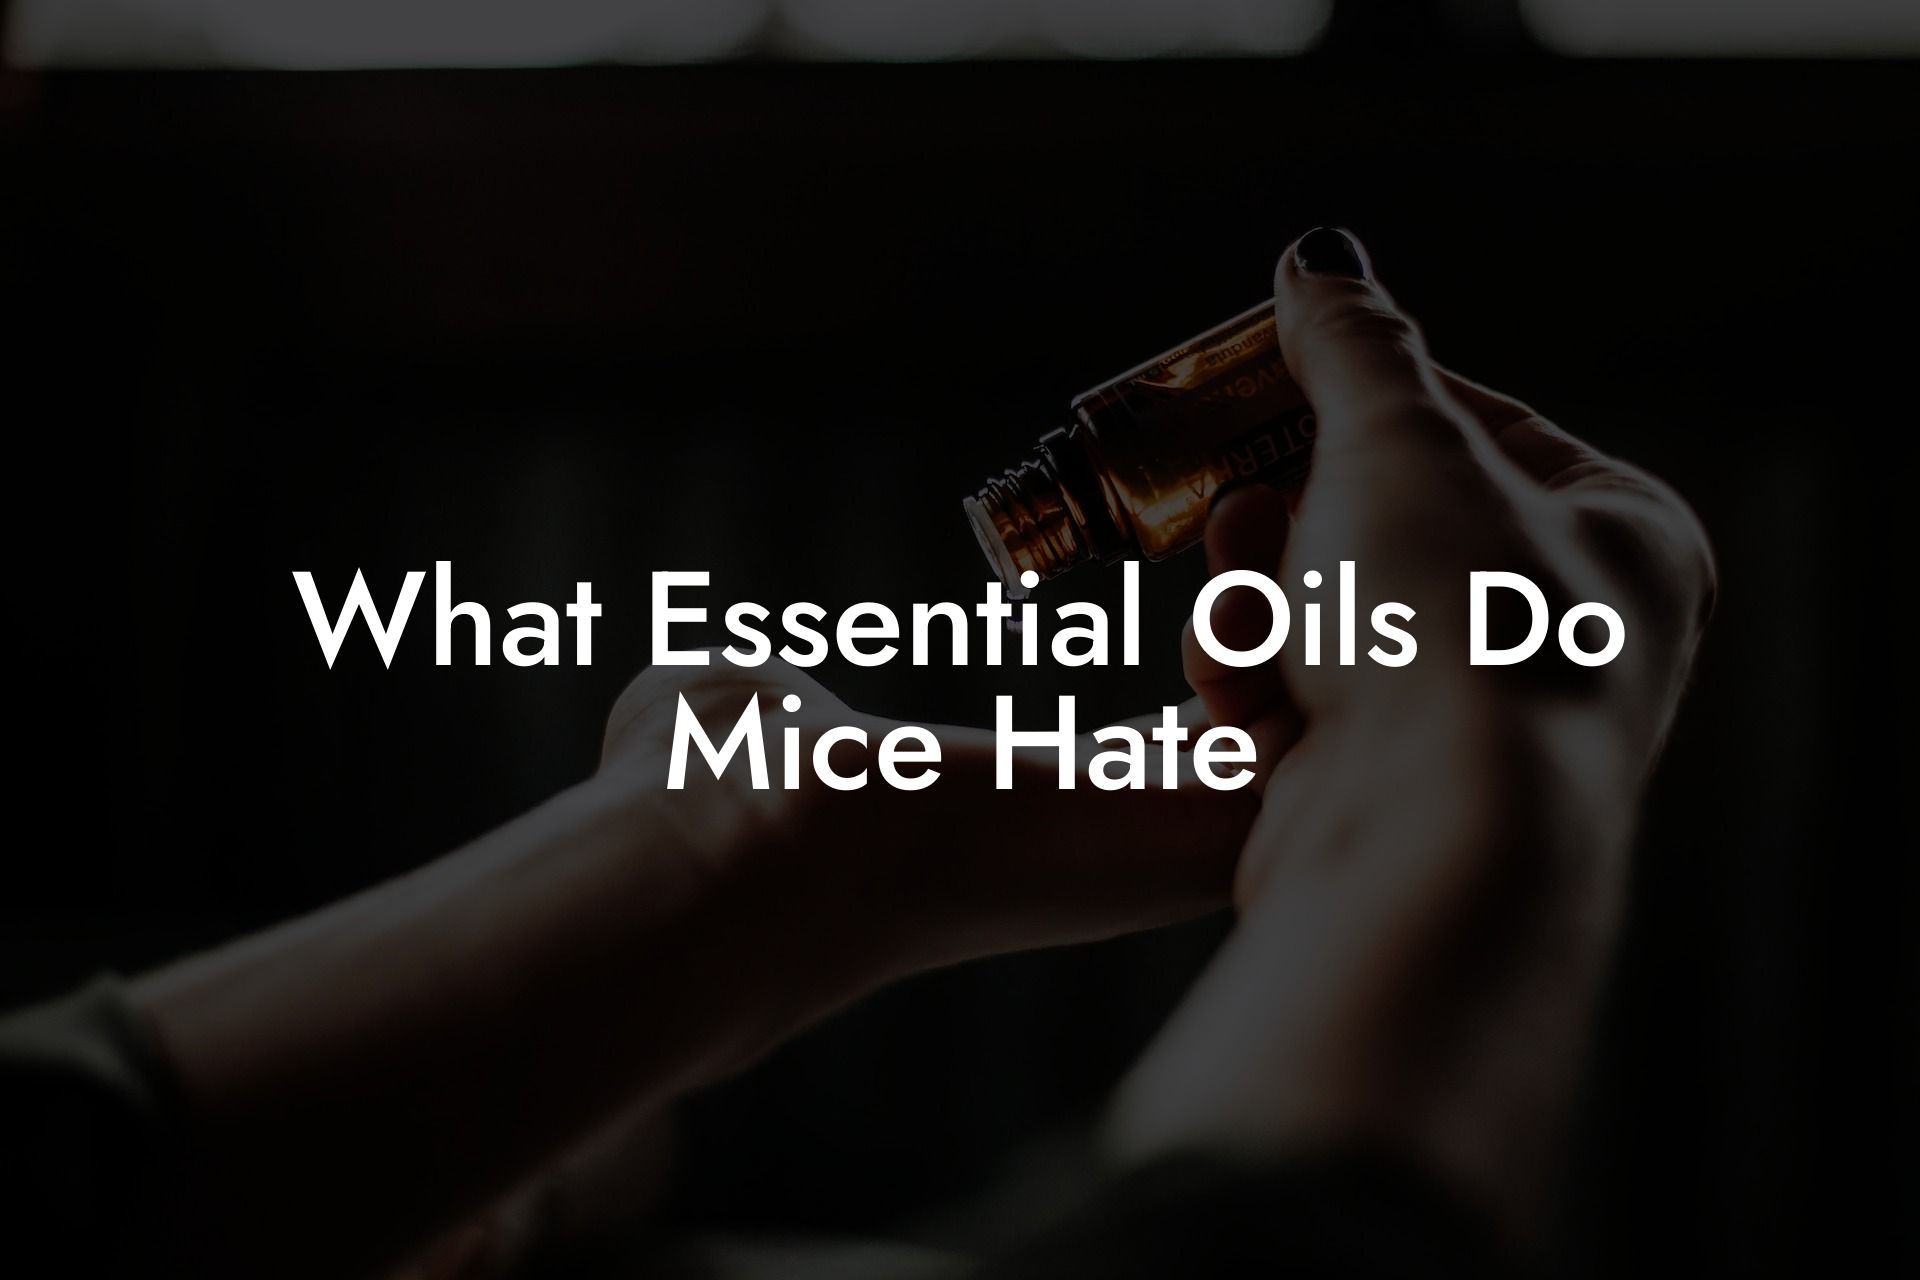 What Essential Oils Do Mice Hate